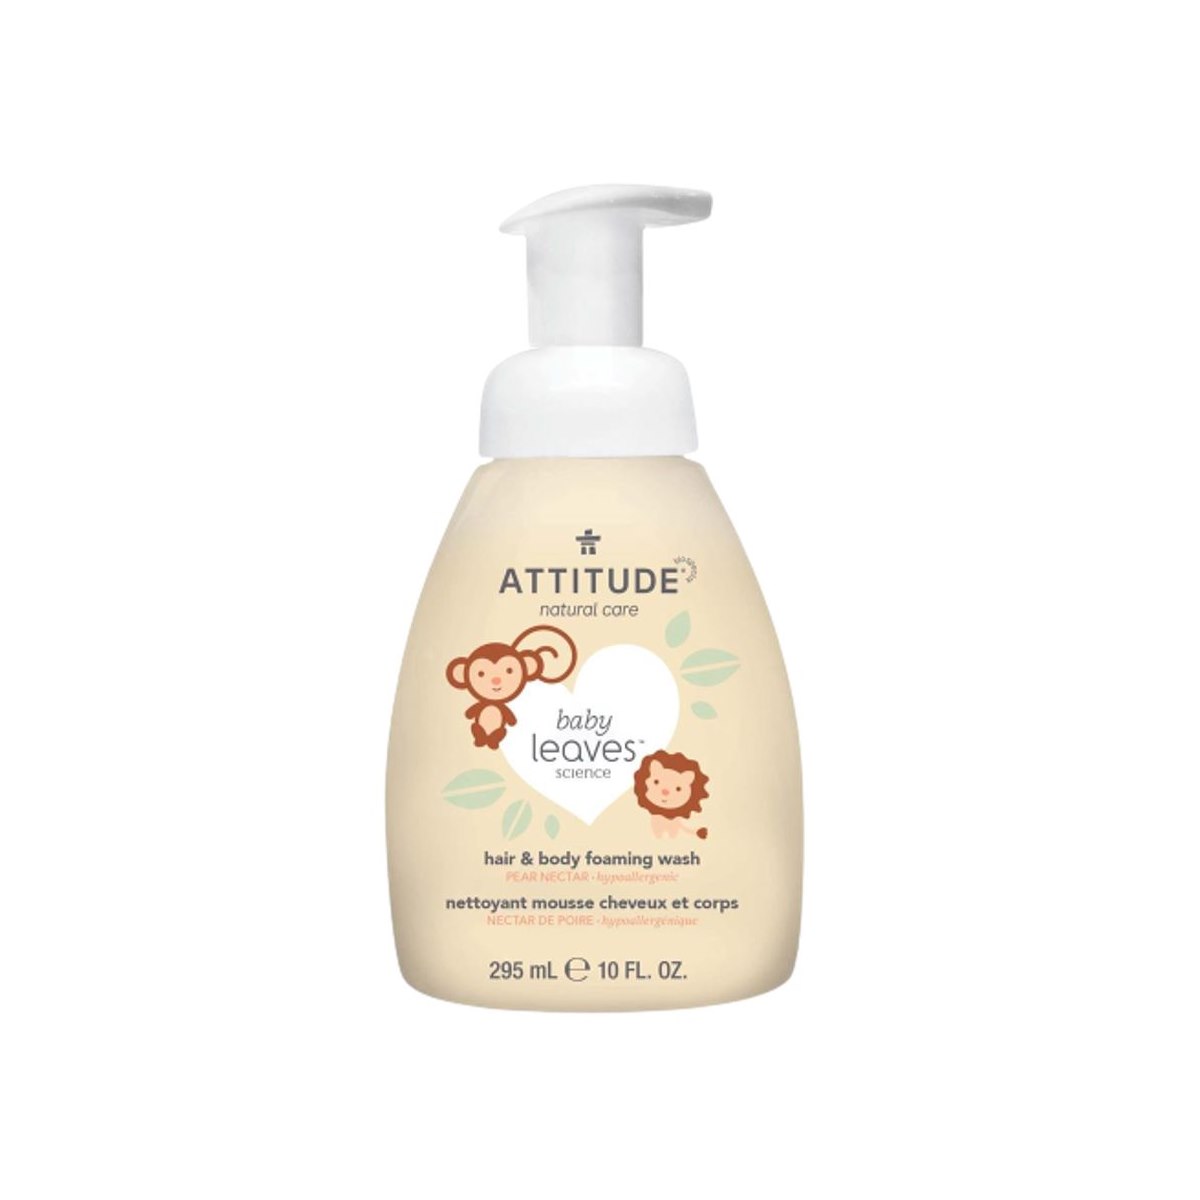 Attitude Baby Leaves 2in1 Foaming Wash - Pear Nectar 295 ml